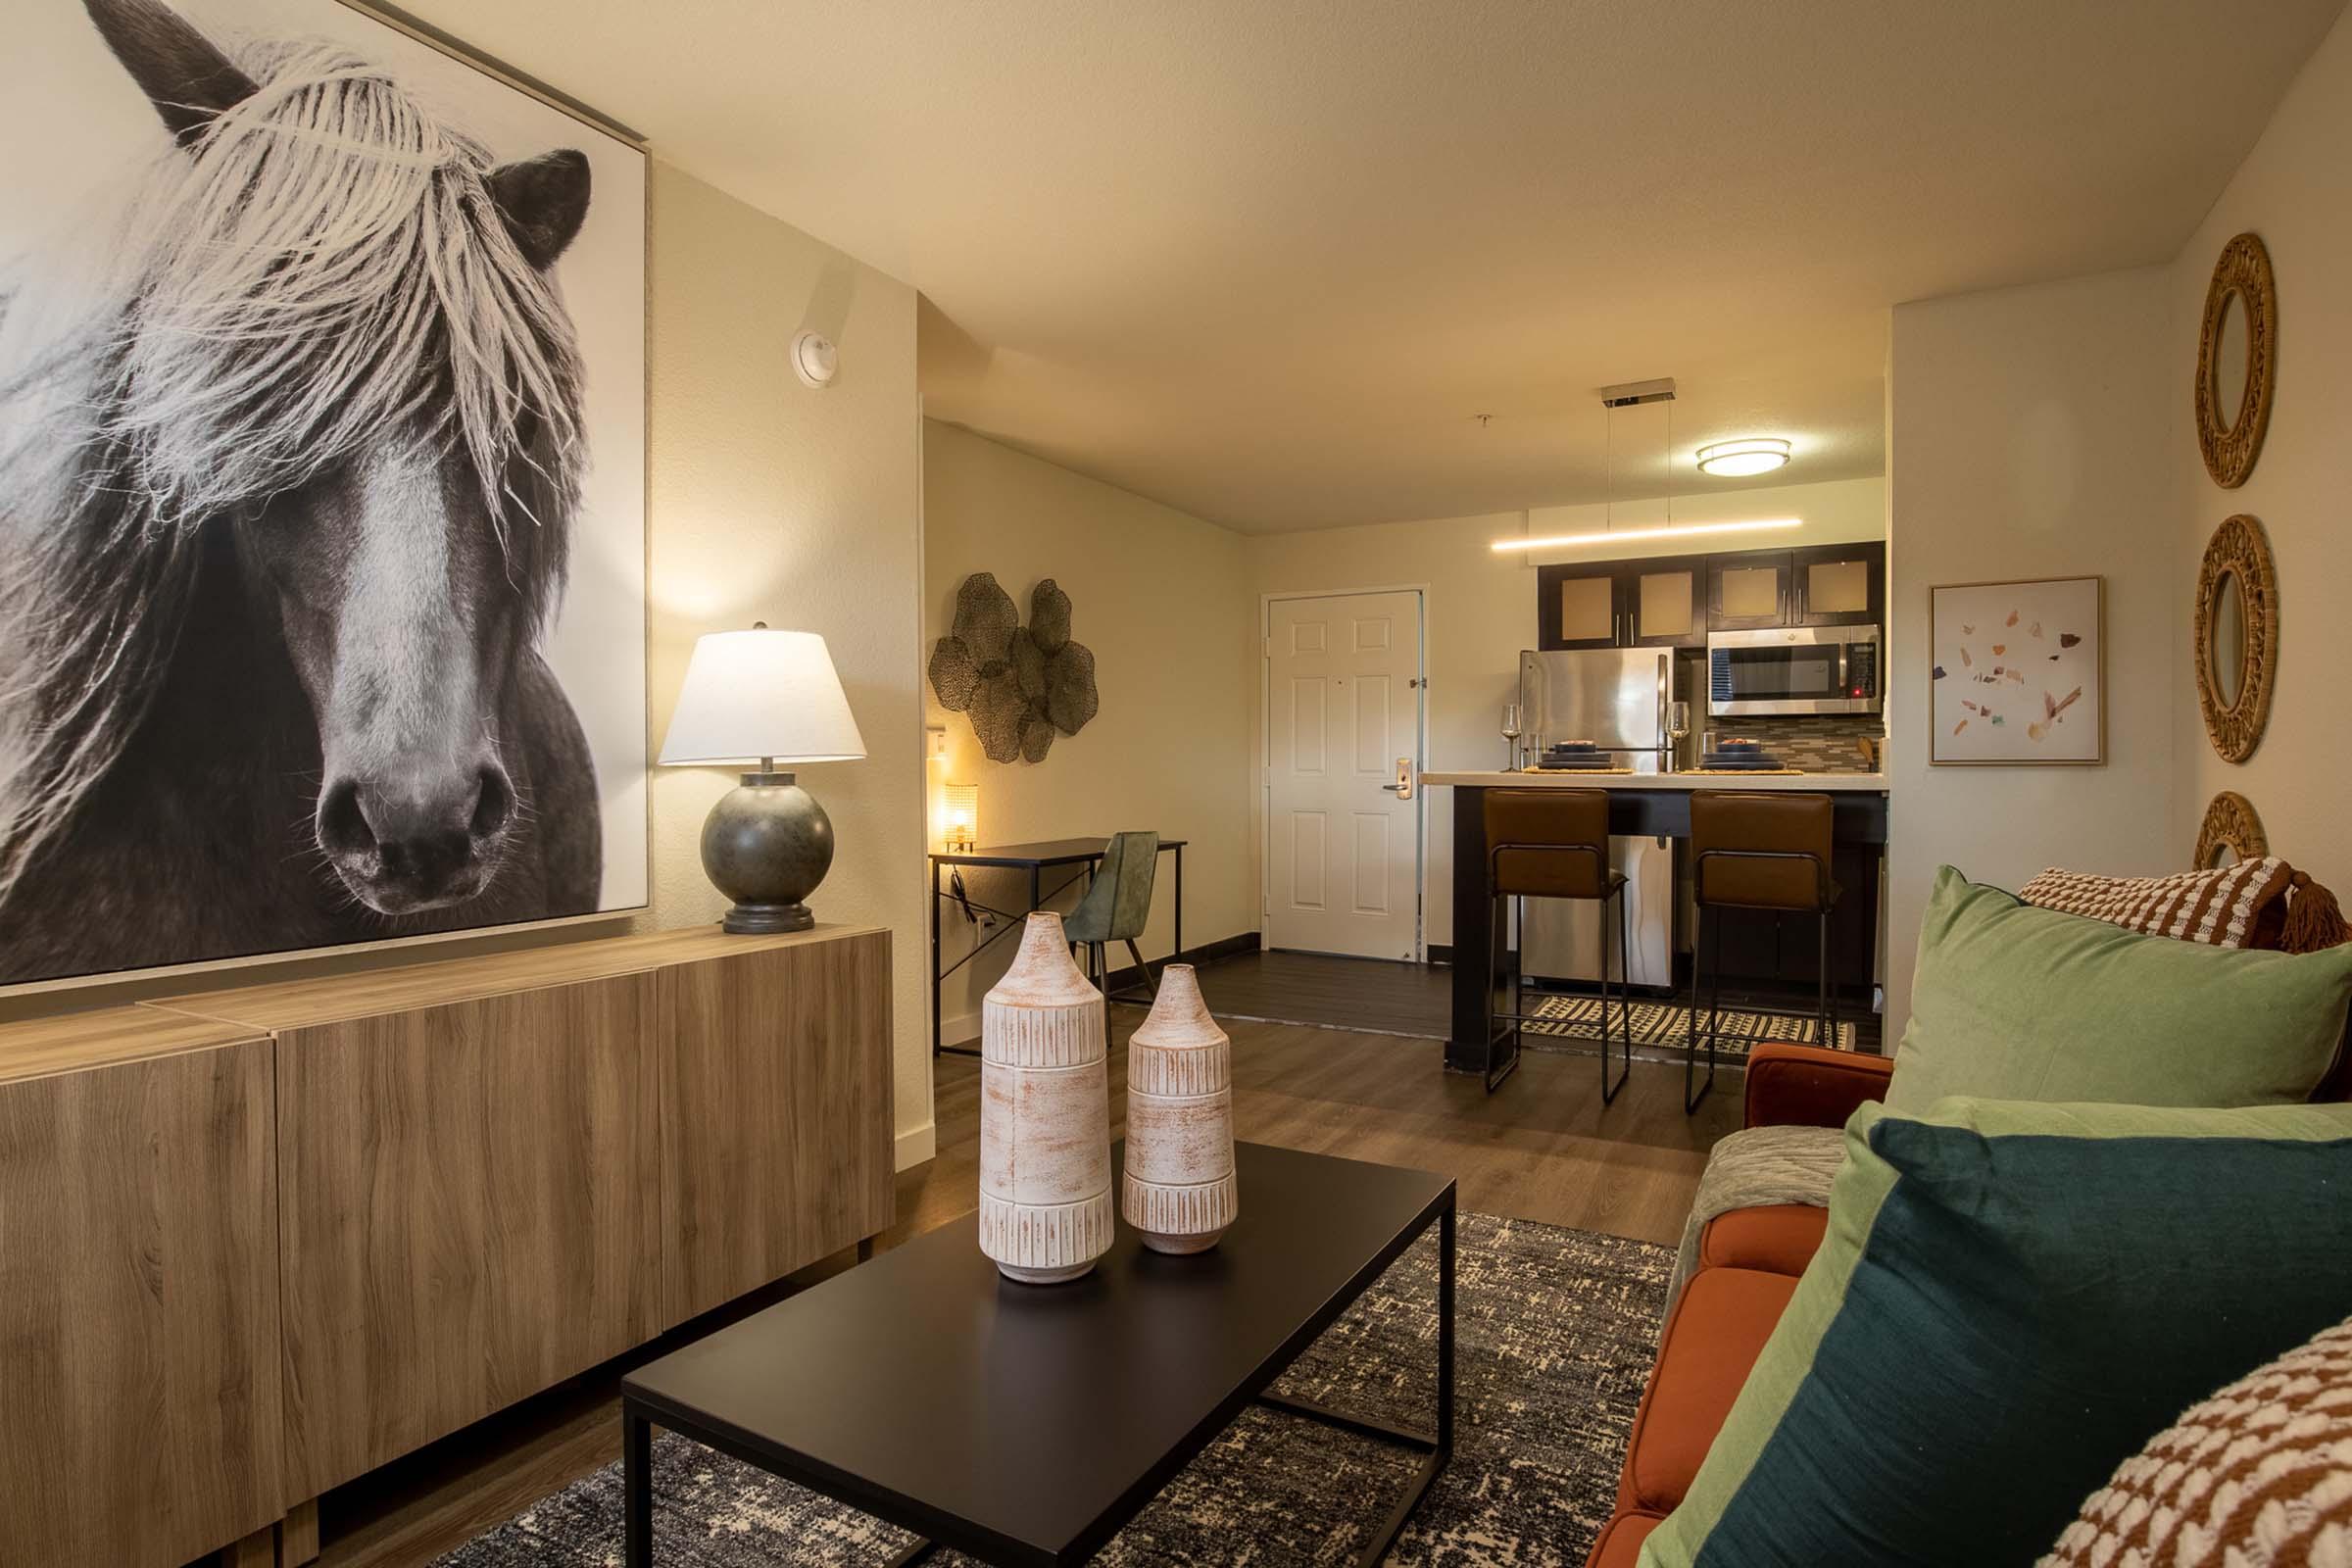 a horse standing in a room